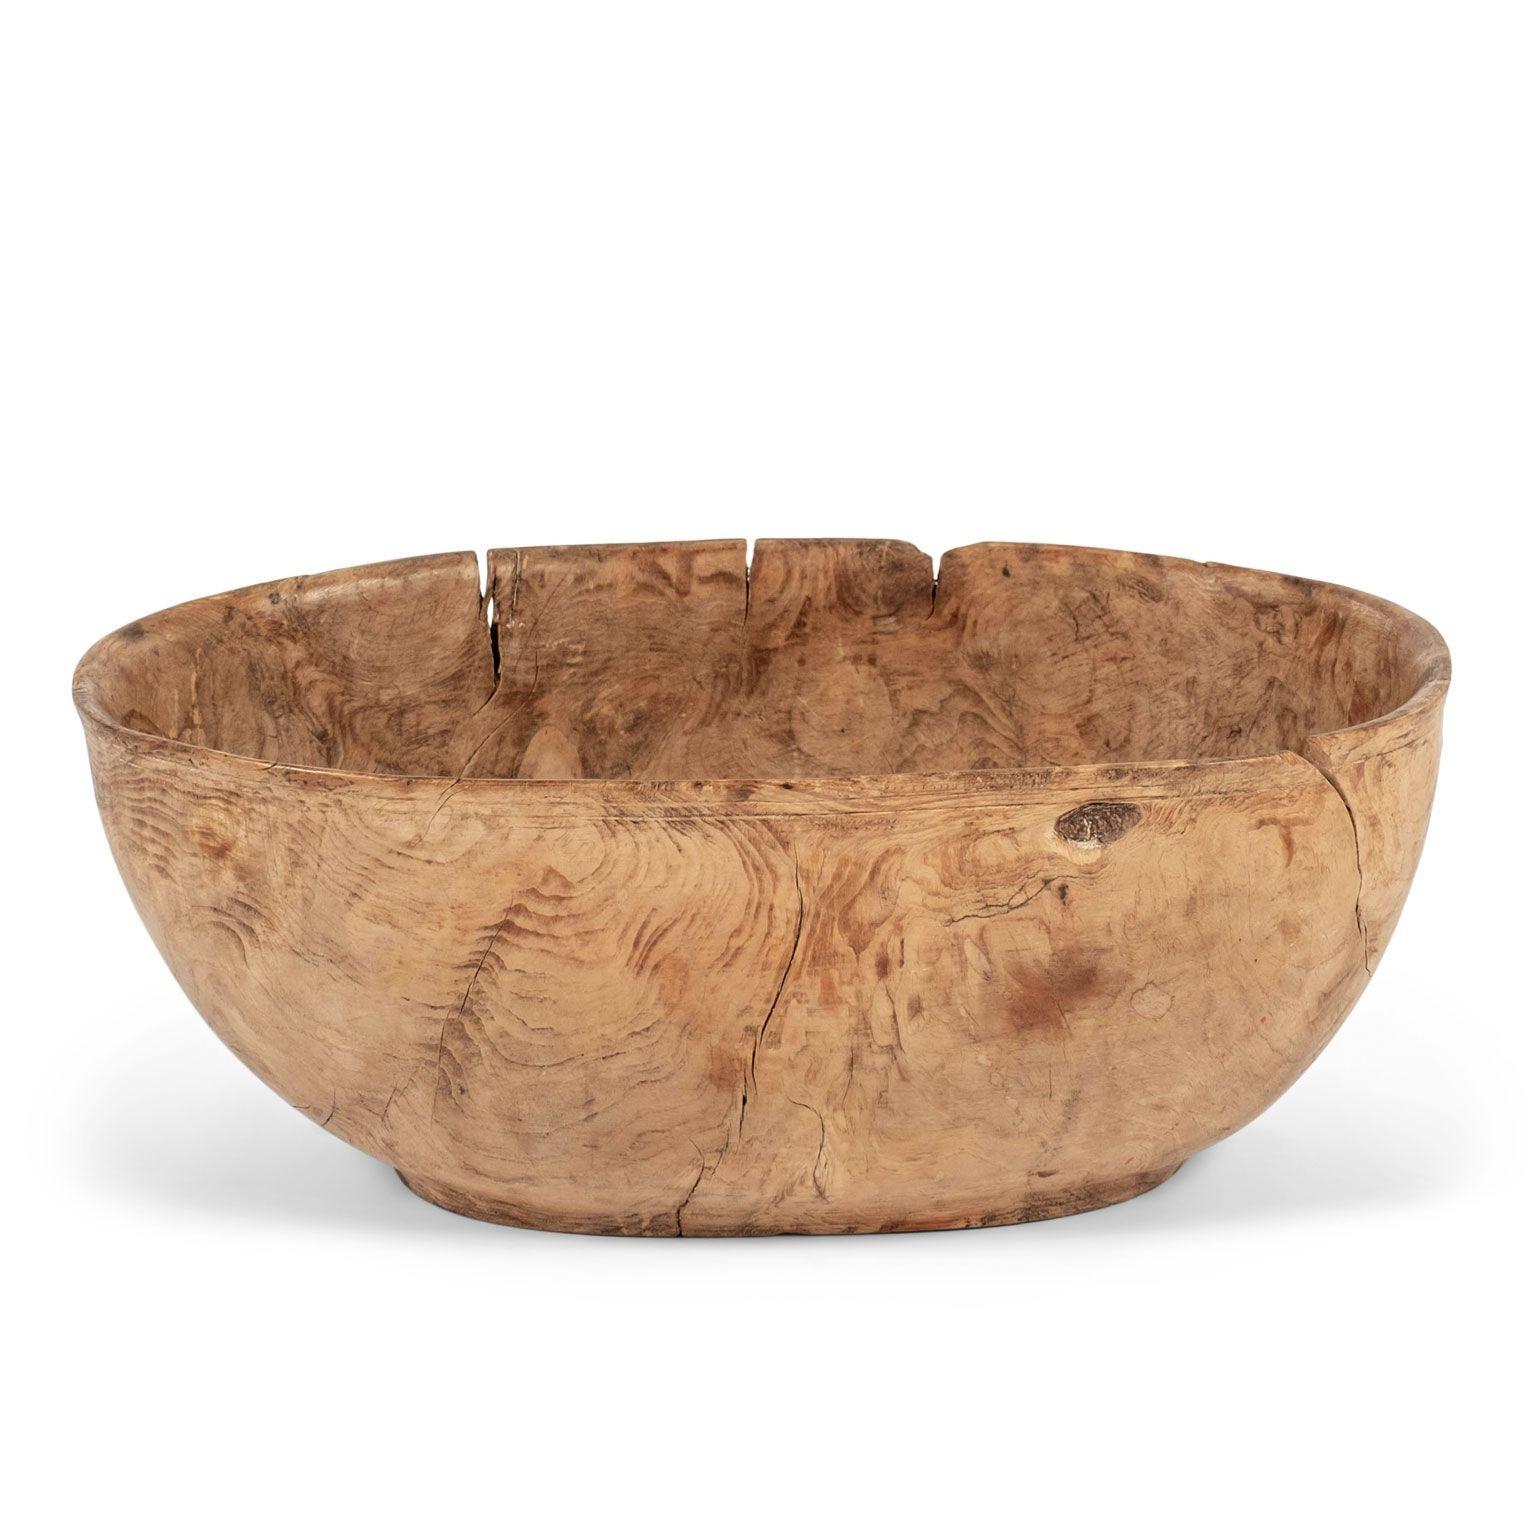 Mid-brown gorgeous Swedish oval-shaped burl root wood bowl dating to the 19th century. Hand-carved from burl fruitwood. Beautiful burl grain and dry patina.

Note: Due to regional changes in humidity and climate during shipping, antique wood may